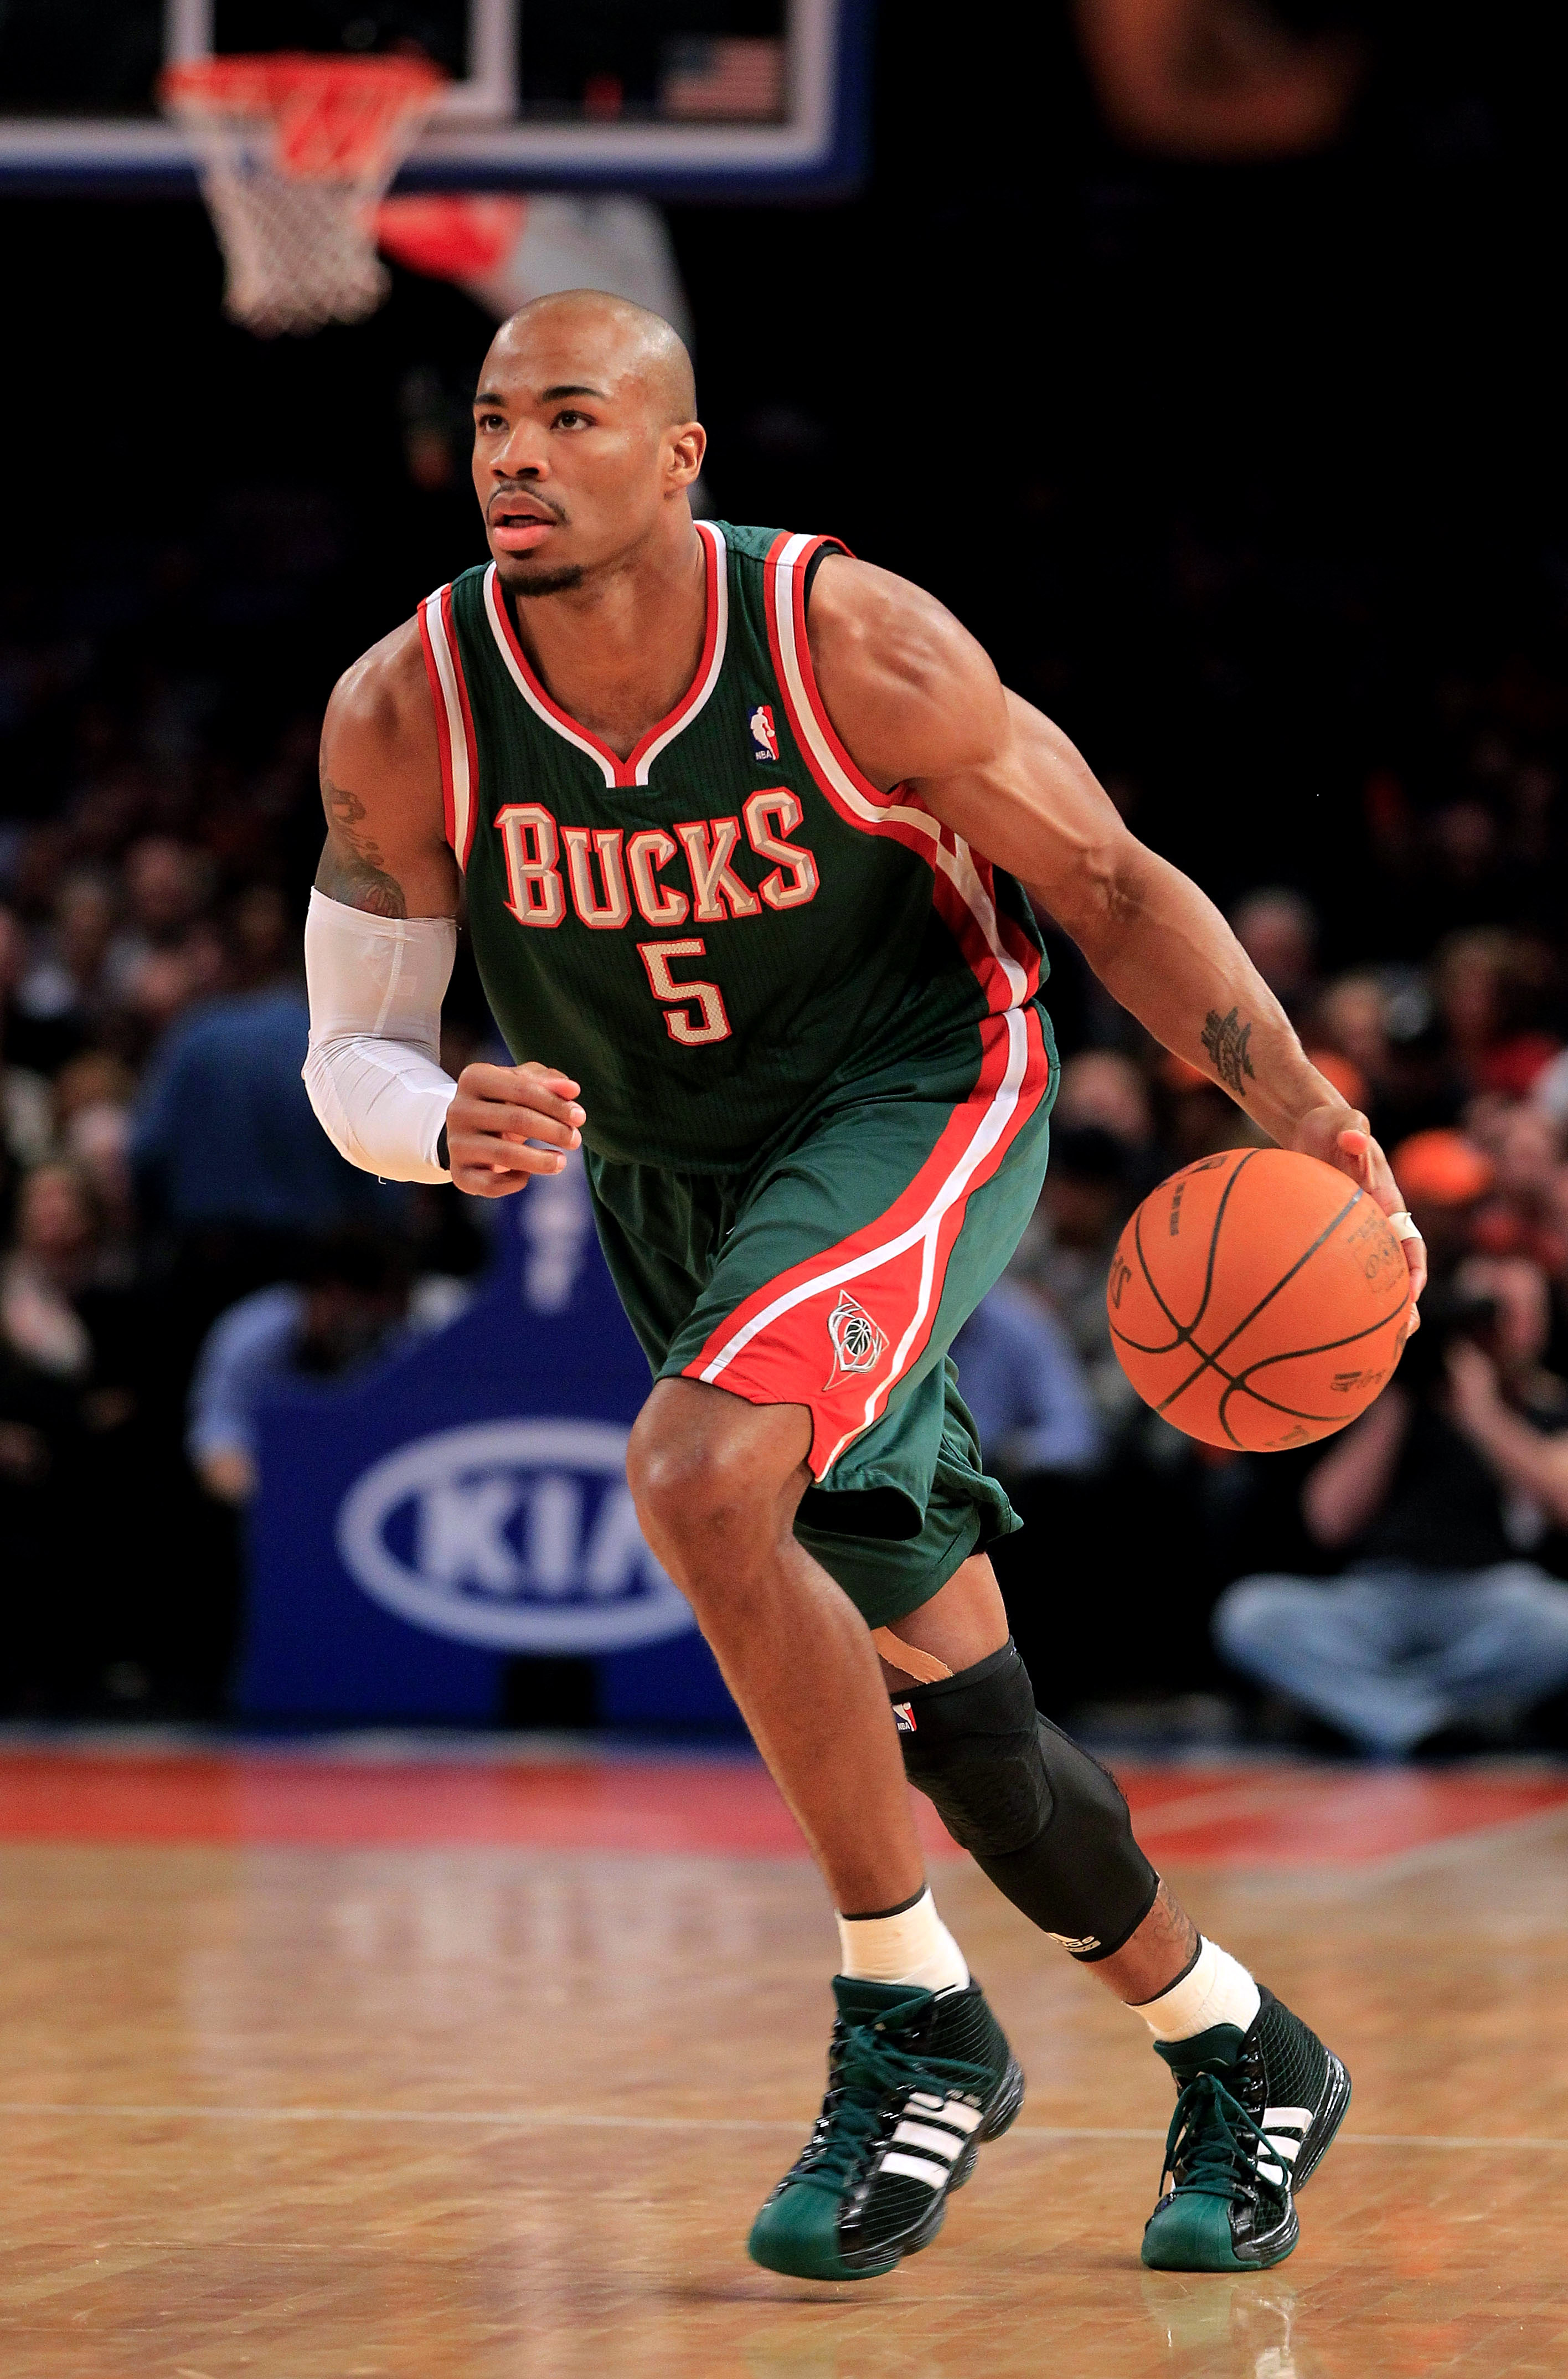 NEW YORK, NY - FEBRUARY 23: Corey Maggette #5 of the Milwaukee Bucks dribbles the ball against the New York Knicks at Madison Square Garden on February 23, 2011 in New York City. NOTE TO USER: User expressly acknowledges and agrees that, by downloading an